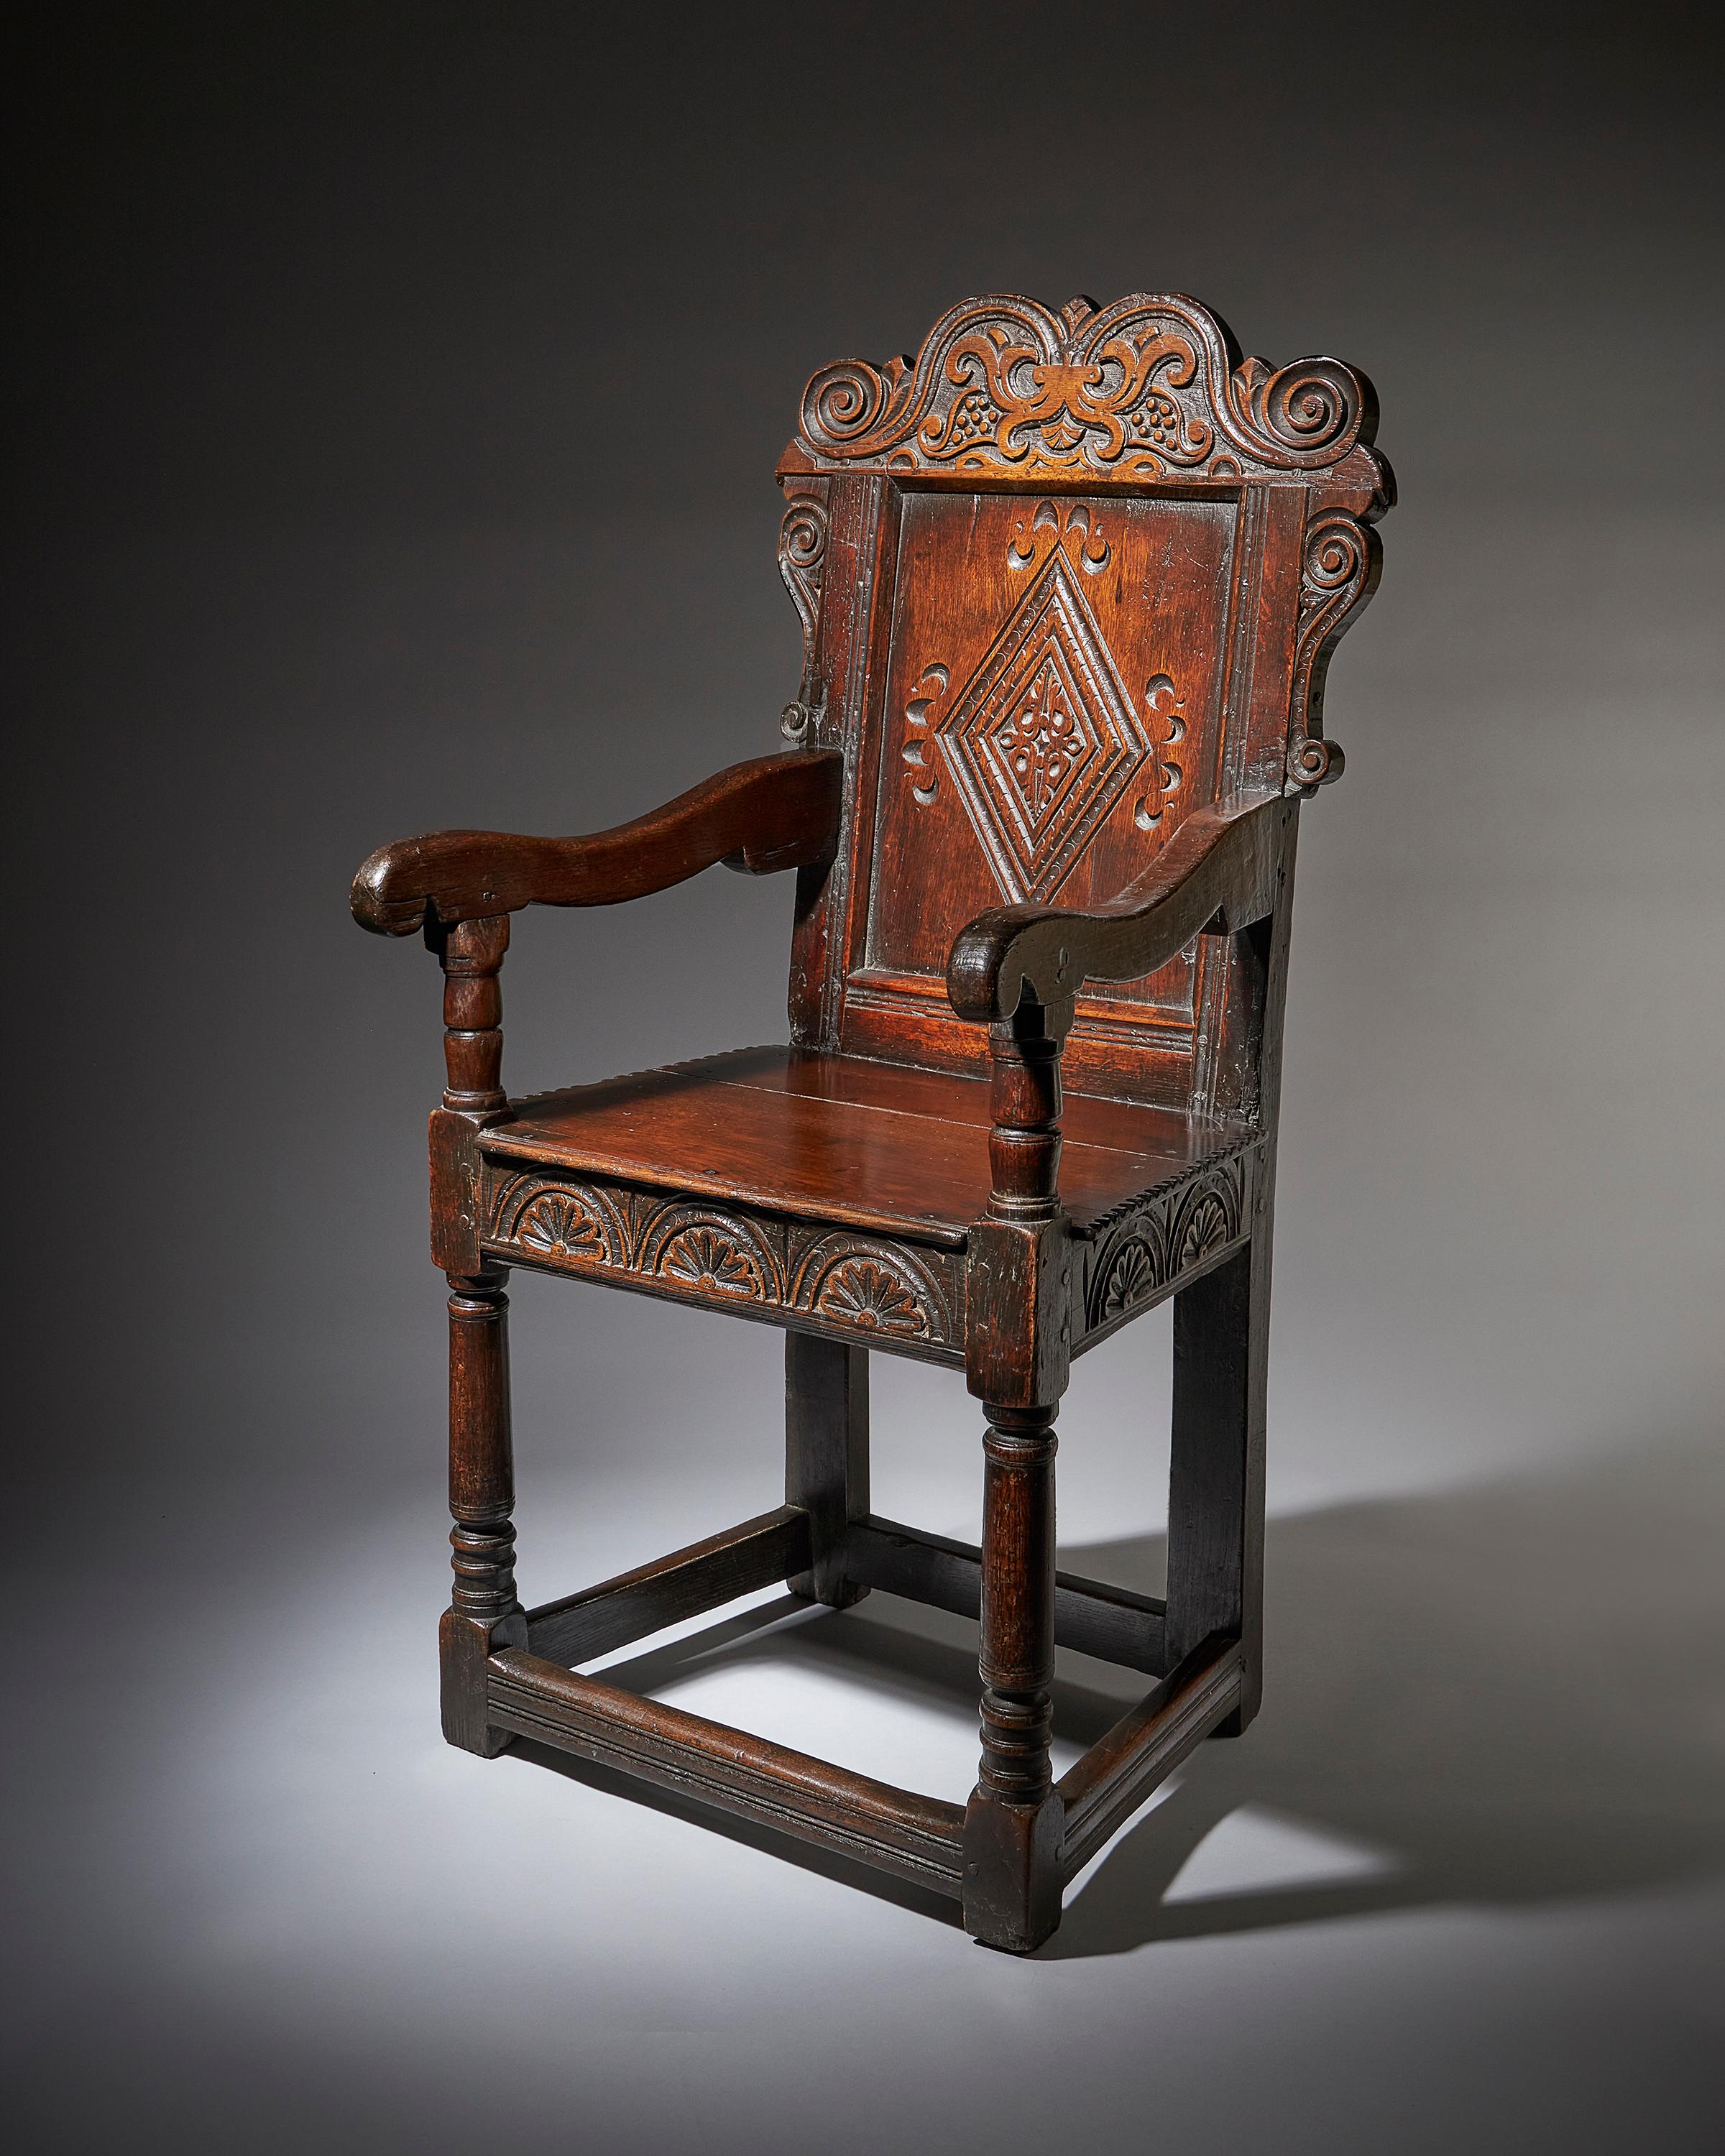 A superb and original carved Wainscot armchair, circa 1660. Yorkshire

This superb Wainscot chair dates from the middle of the 17th century and is most likely from the Leeds area of Yorkshire, with a large lozenge designed panel to the back and